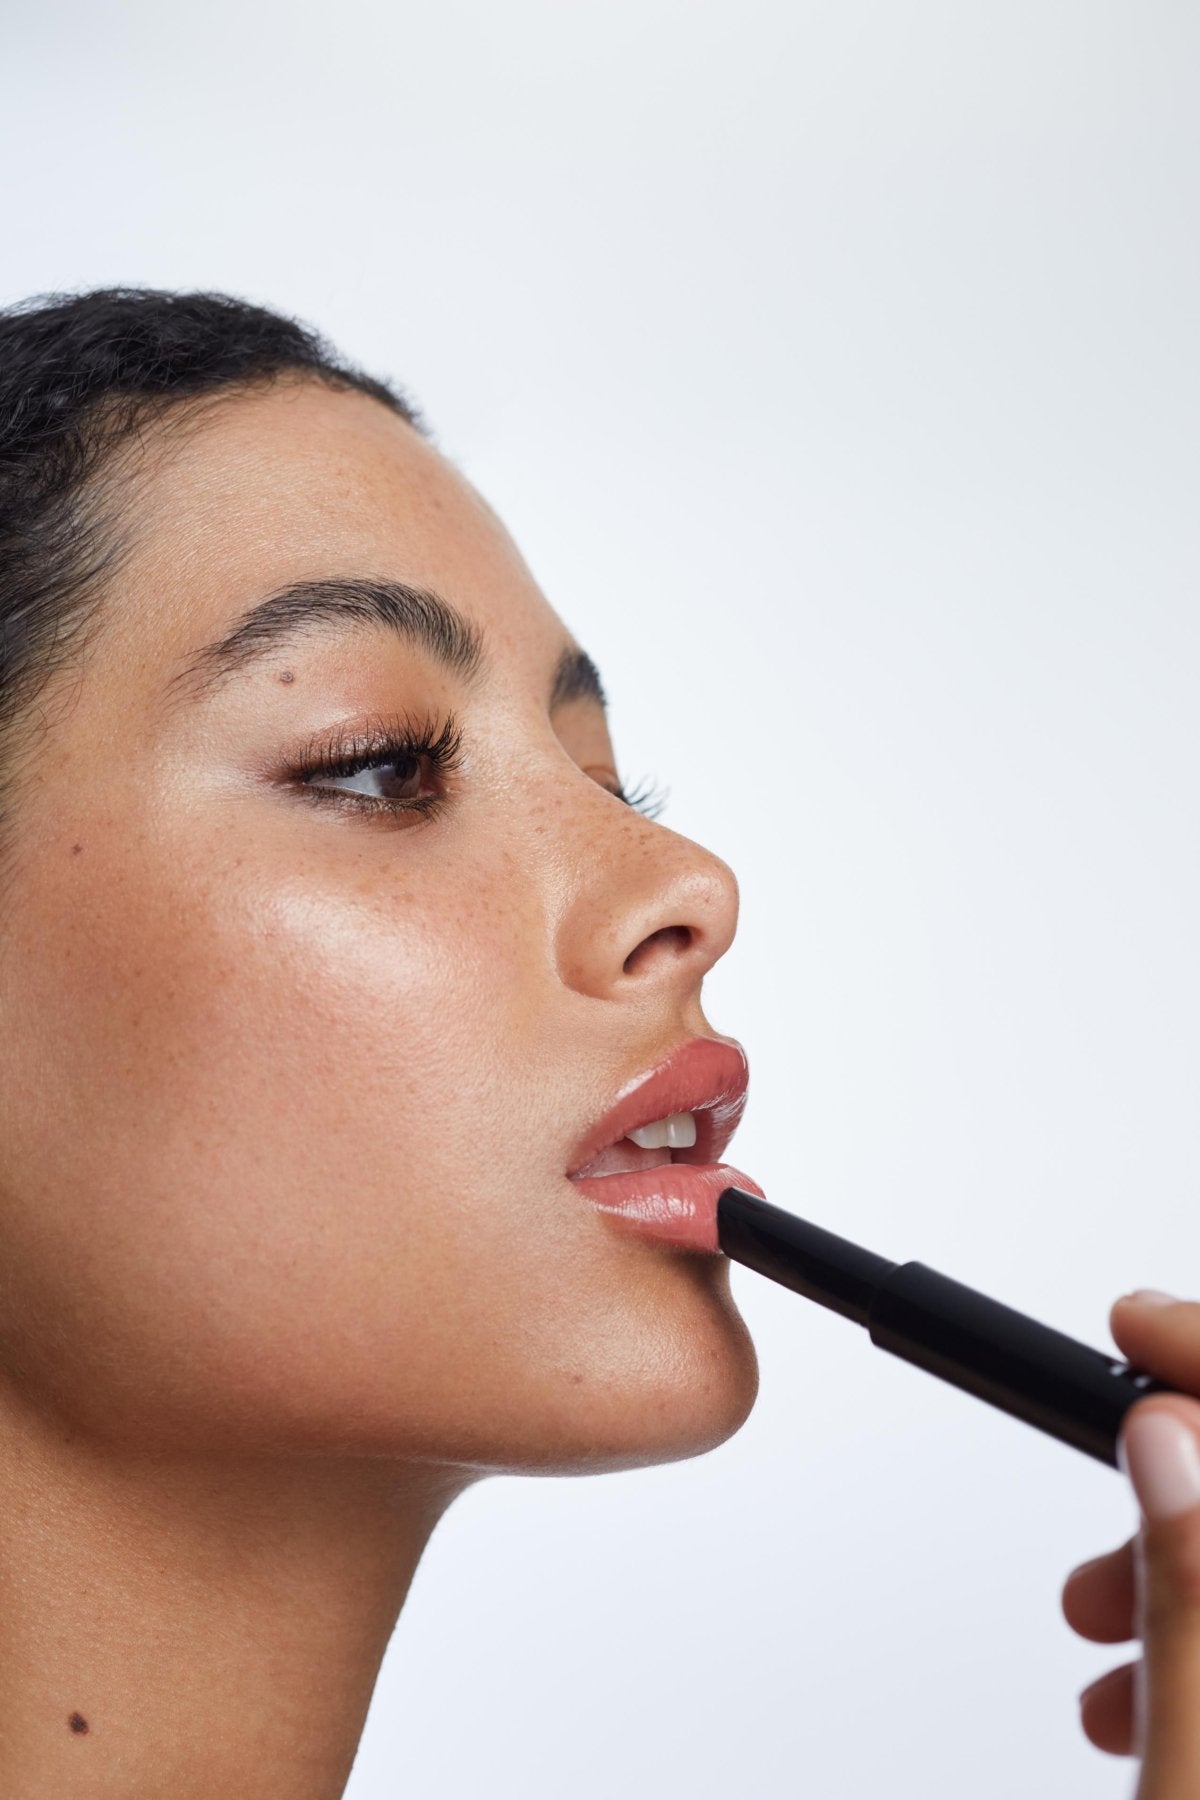 How Does Plumping Lip Gloss Work? - UKLASH